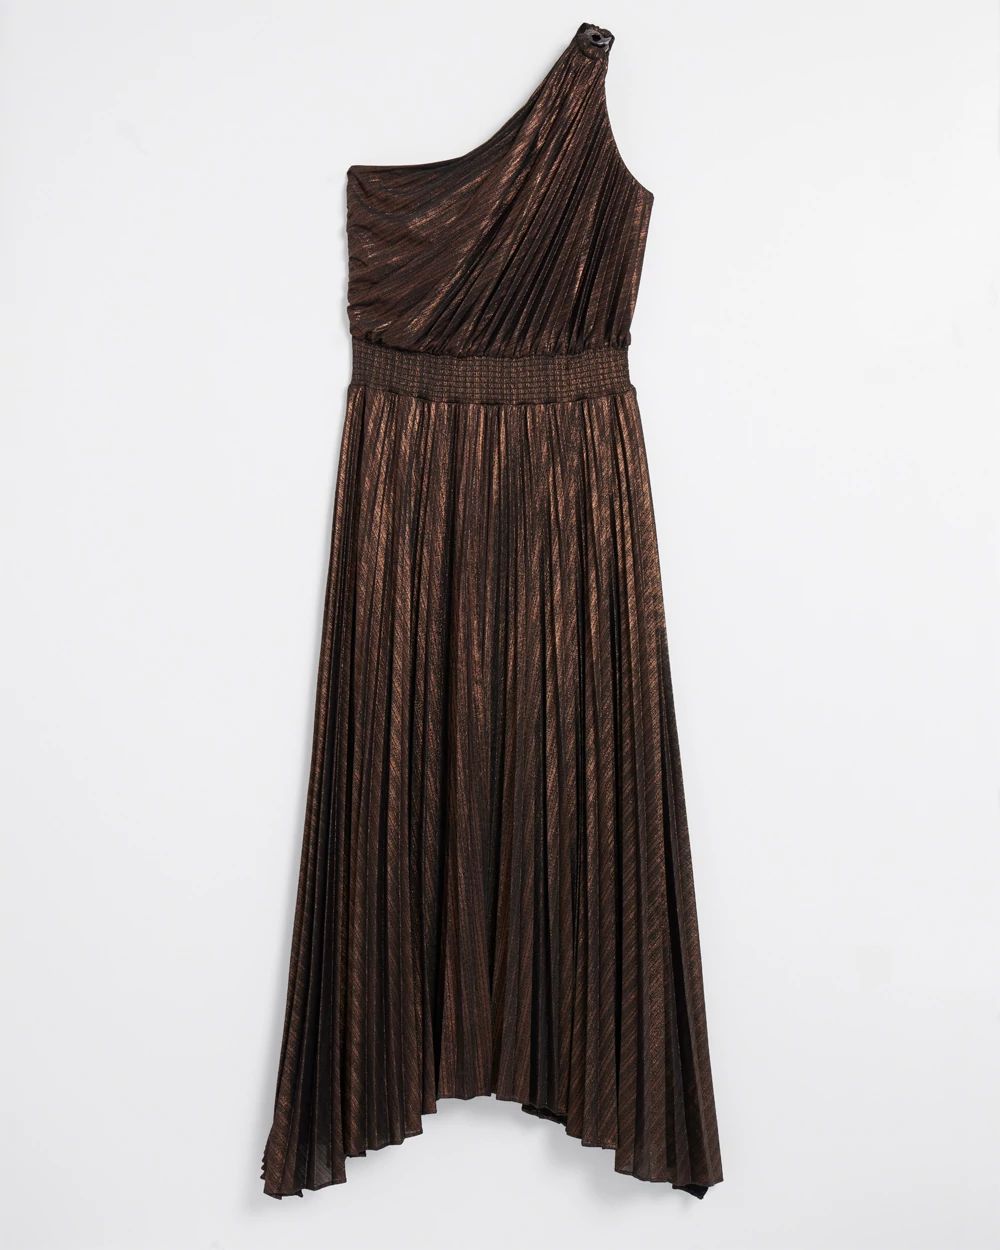 One-Shoulder Bronze Pleated Maxi Dress click to view larger image.